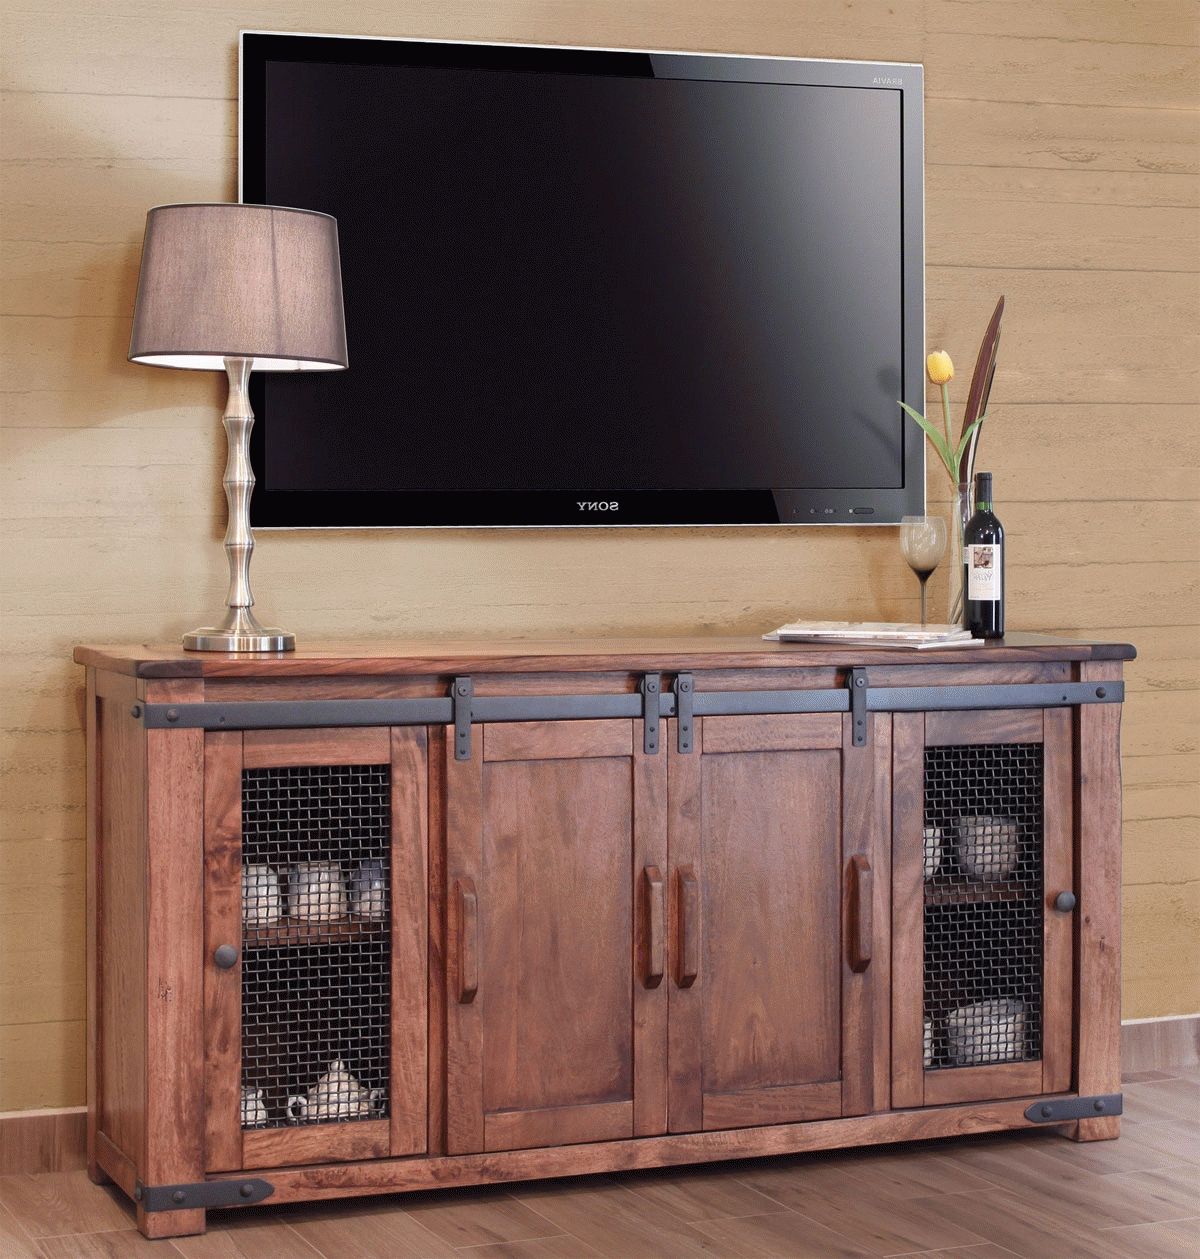 Rustic Tv Stand, Wood Tv Stand, Pine Tv Stand Pertaining To Pine Wood Tv Stands (Gallery 7 of 15)